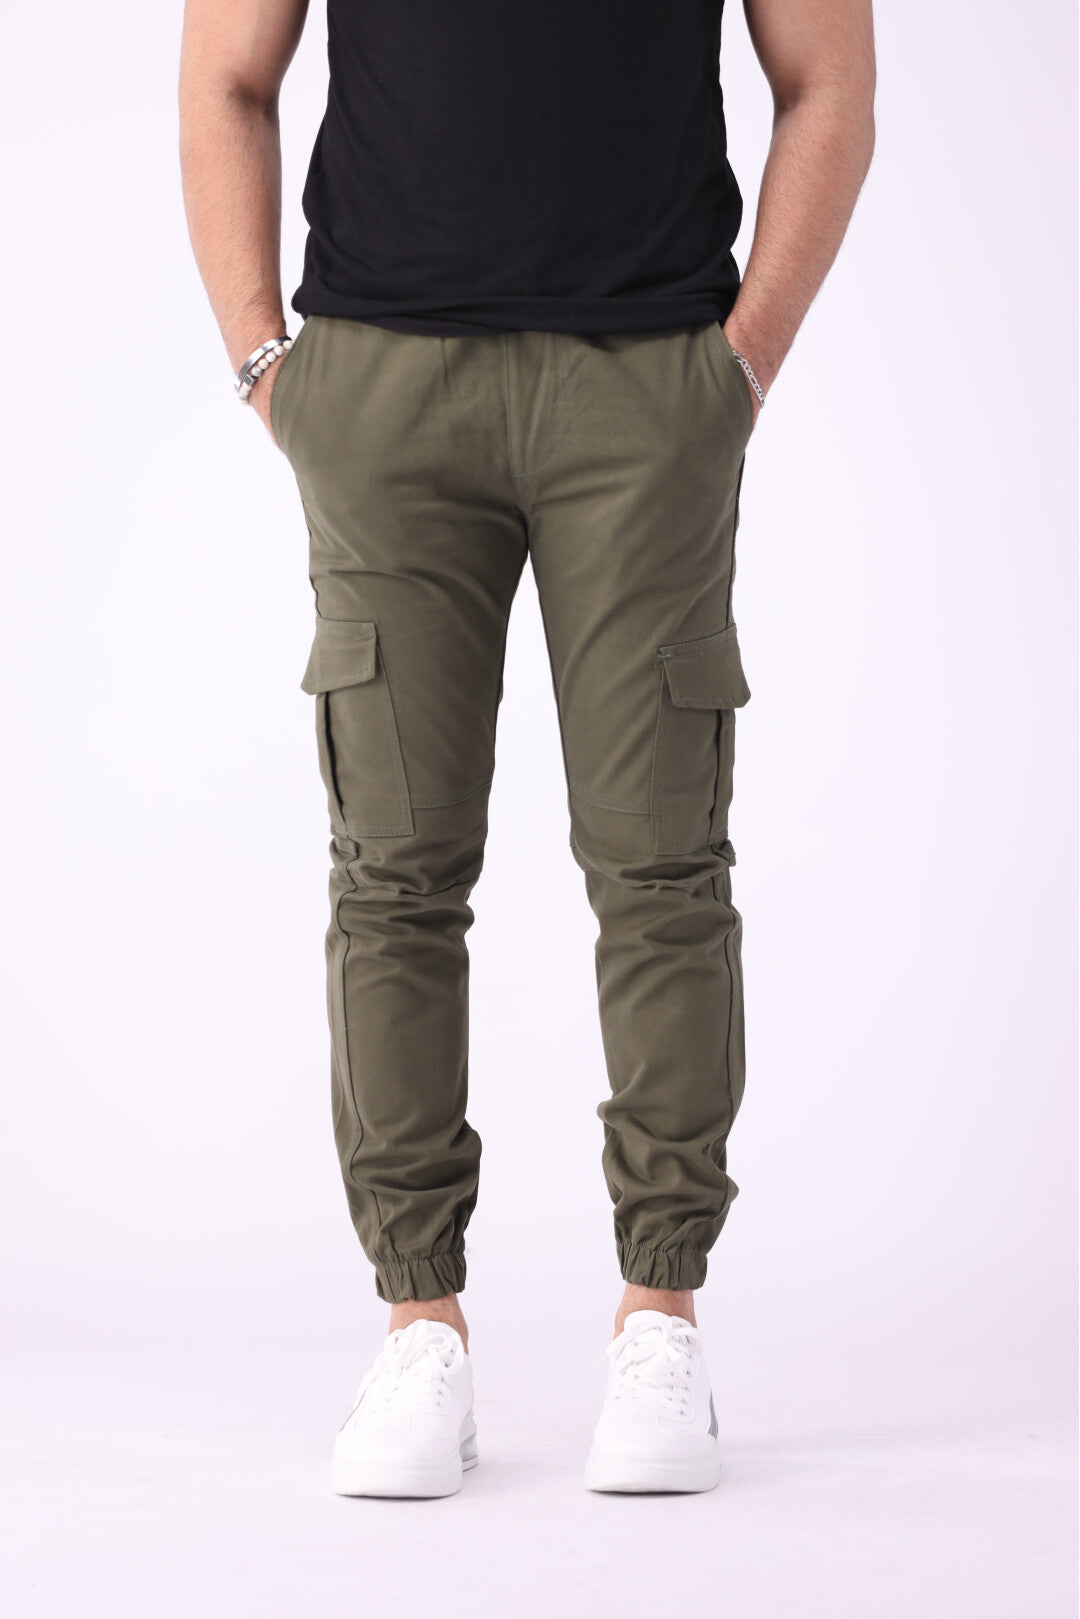 Cargo Six Pocket Trousers for Men, Army Green 6 Pocket Cargo Pant